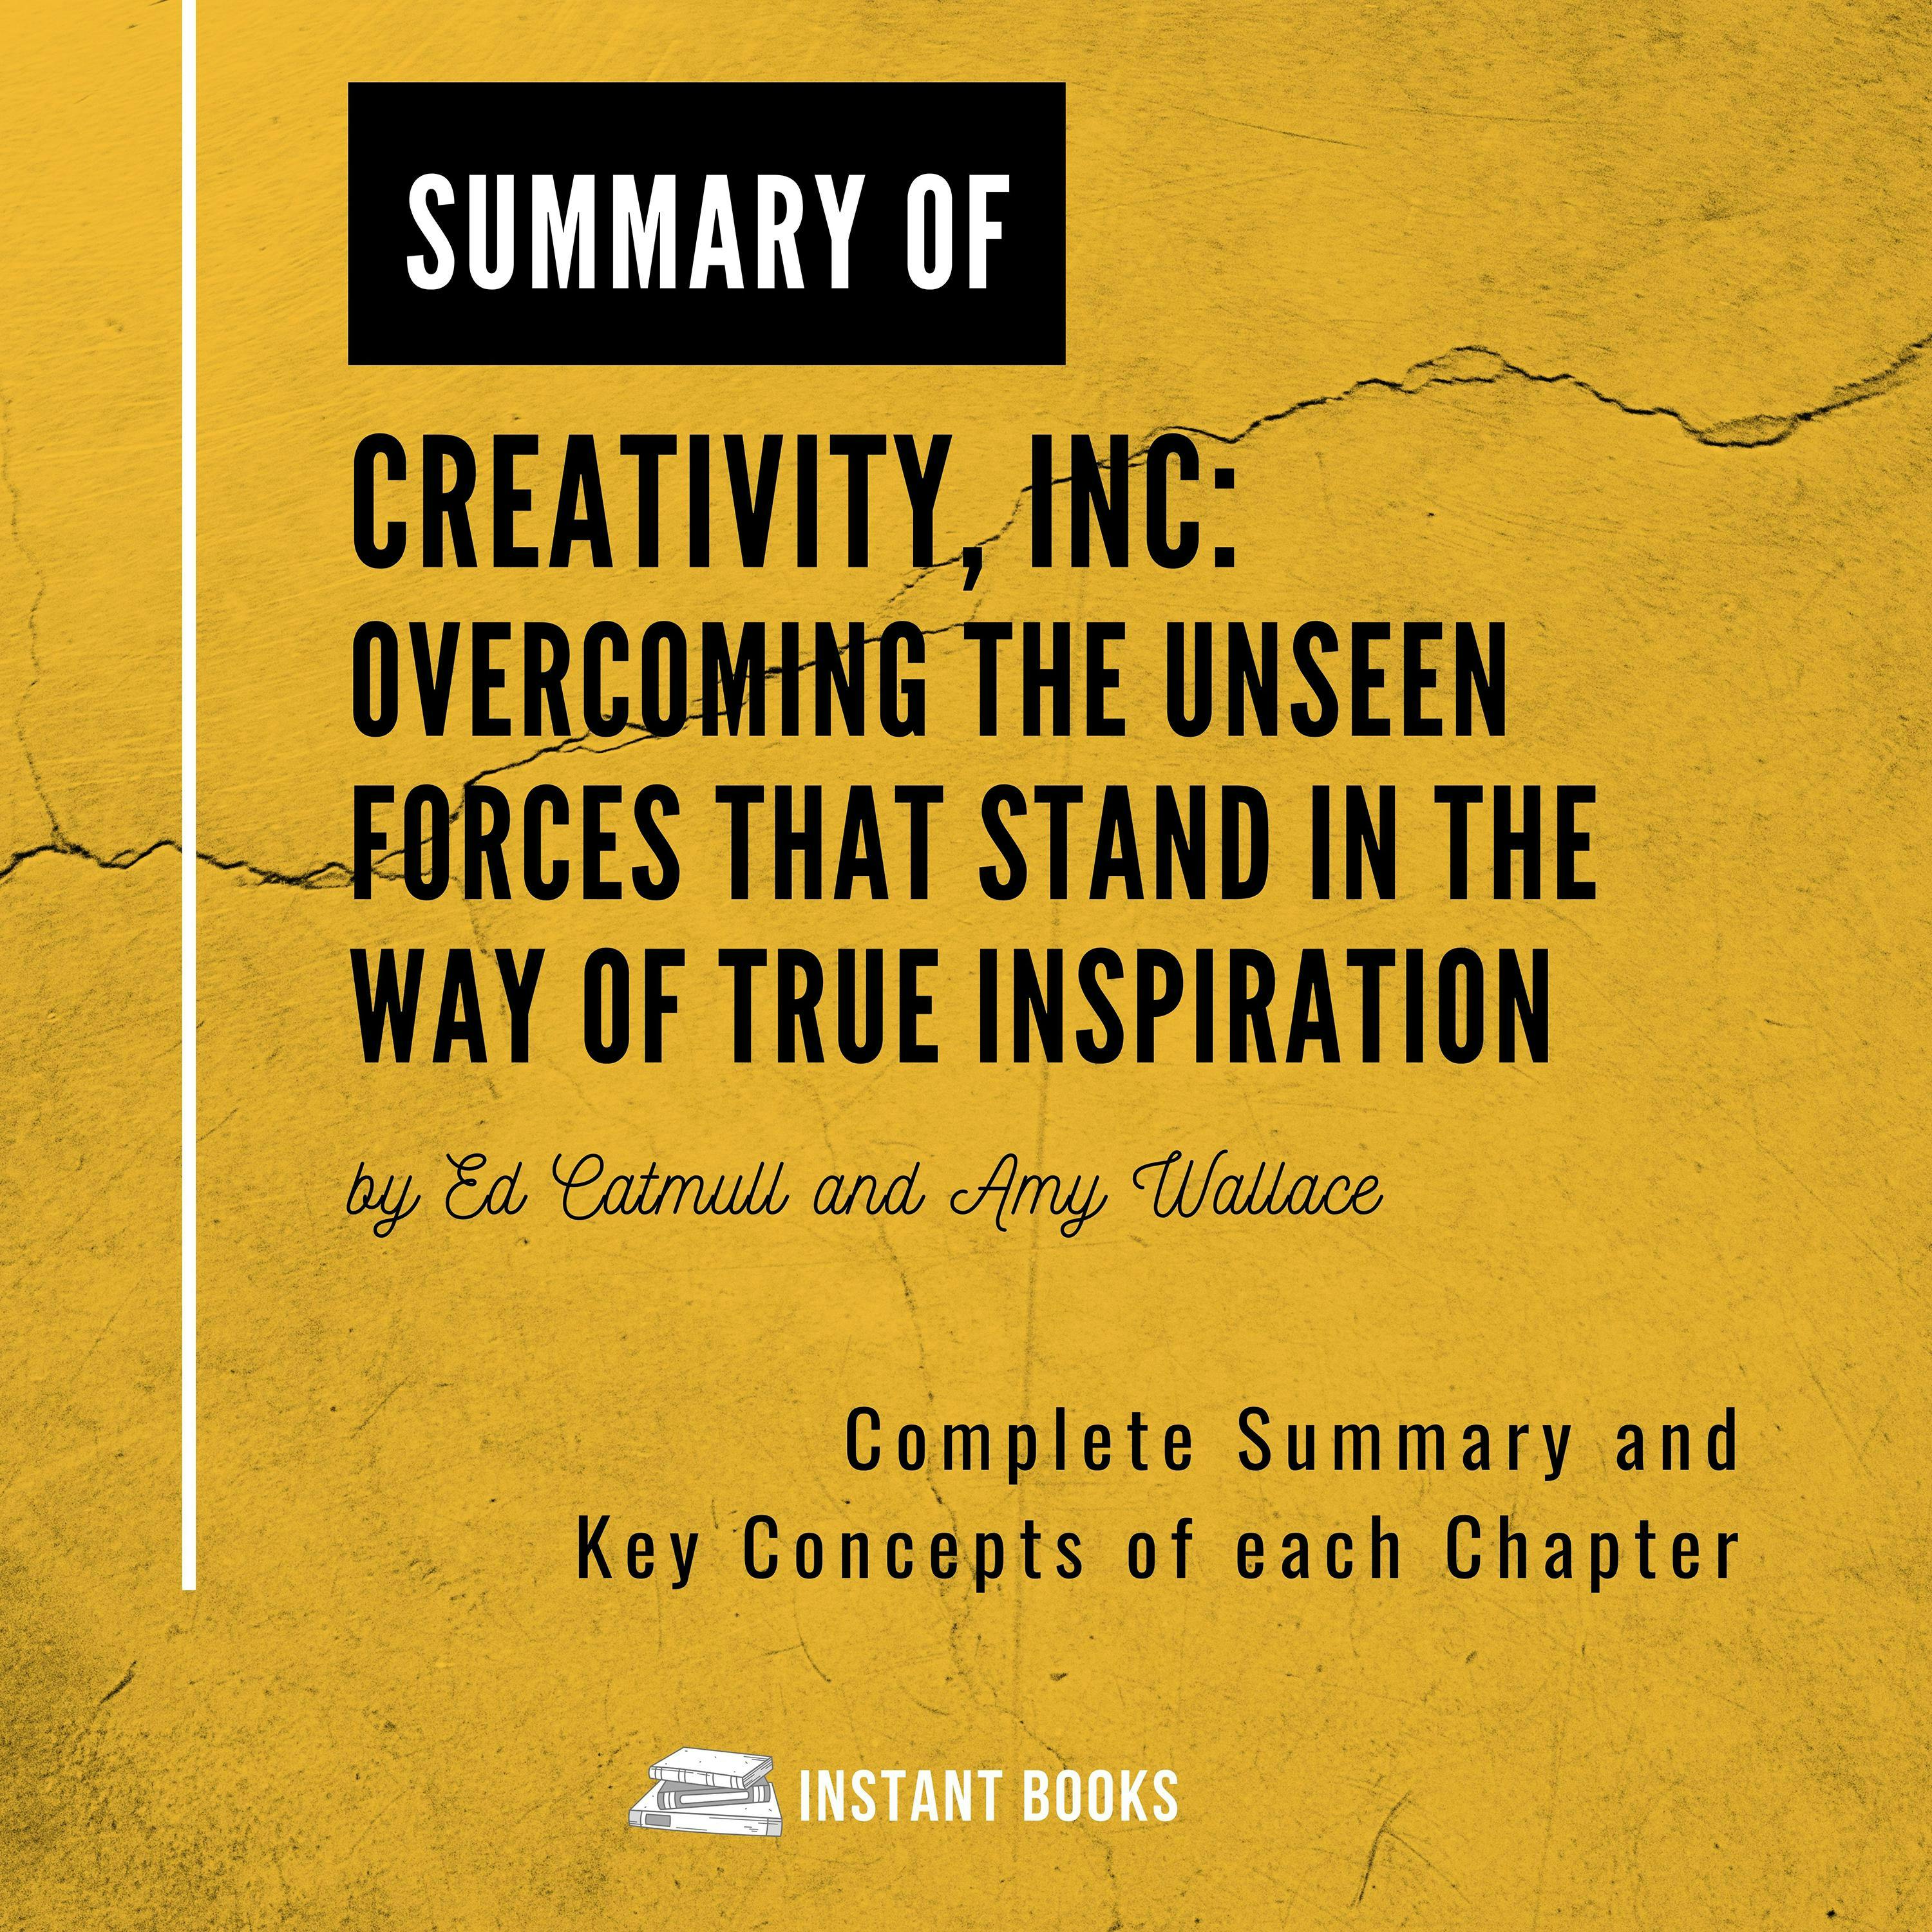 Summary of Creativity, Inc: Overcoming the Unseen Forces That Stand in the Way of True Inspiration by Ed Catmull and Amy Wallace: Complete Summary and Key Concepts of each Chapter - undefined